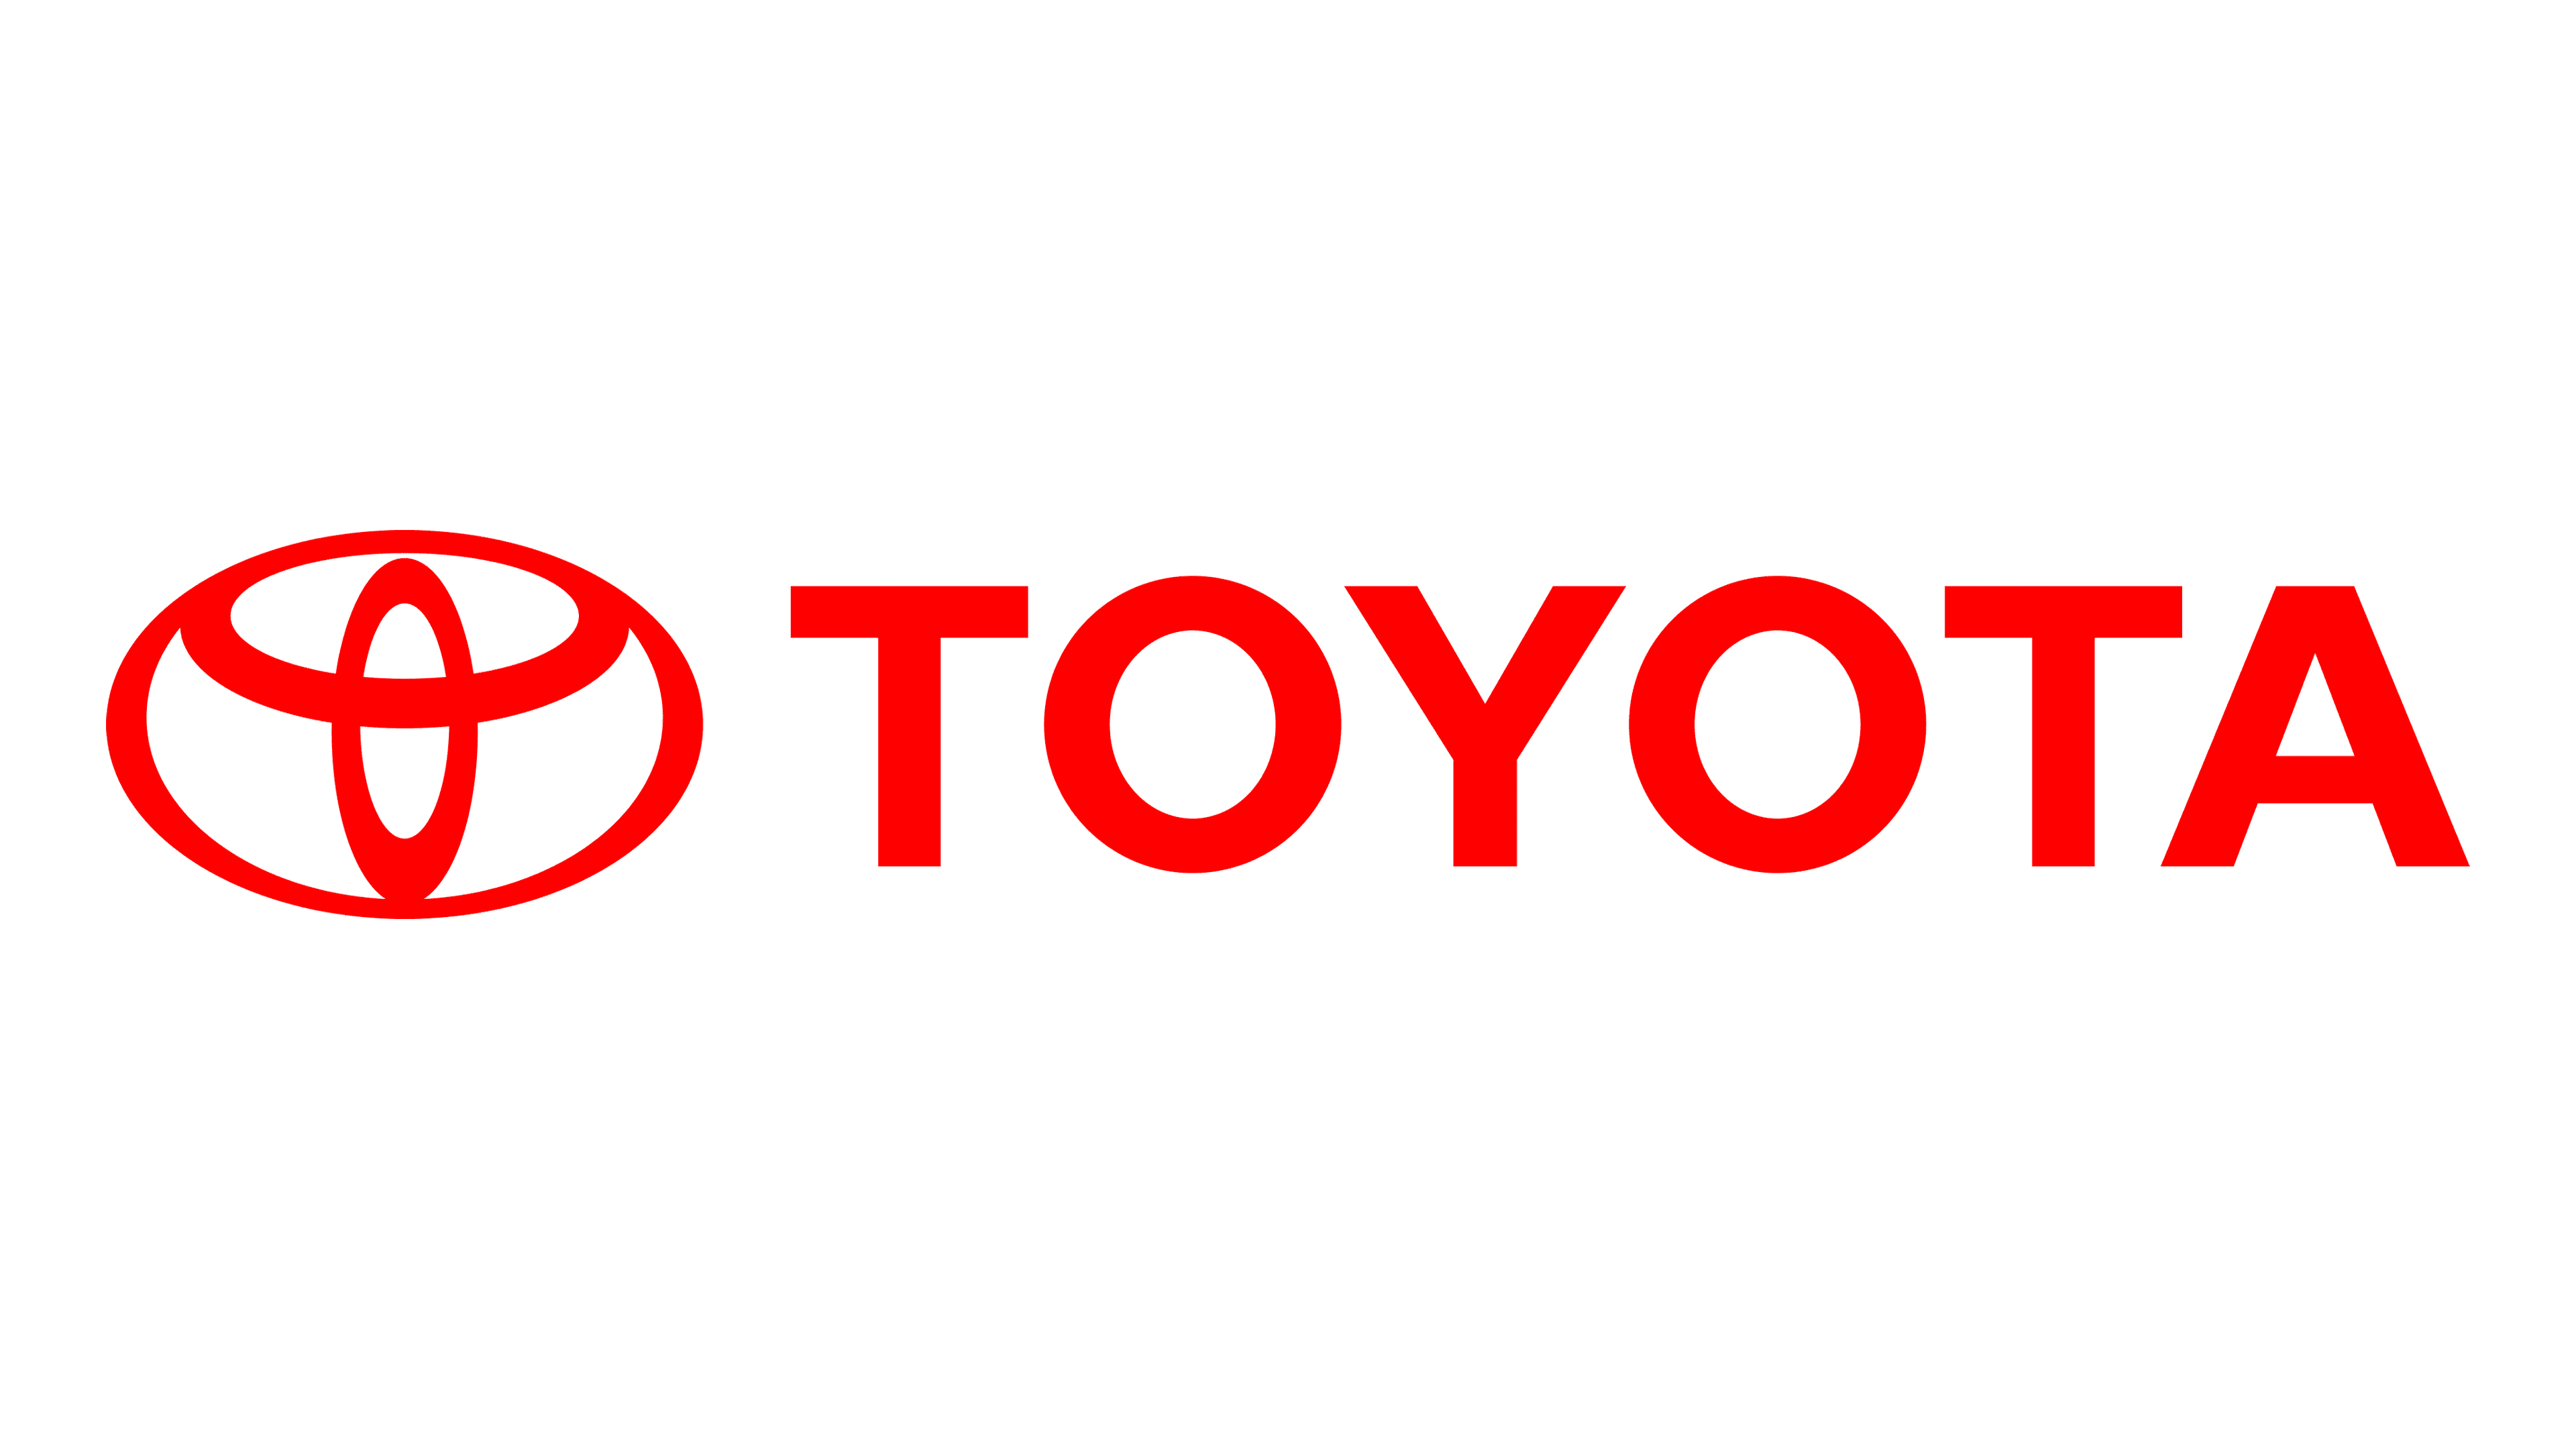 3840x2160 Toyota Logo, Toyota Car Symbol Meaning and History | Car brands car logos, meaning and symbol